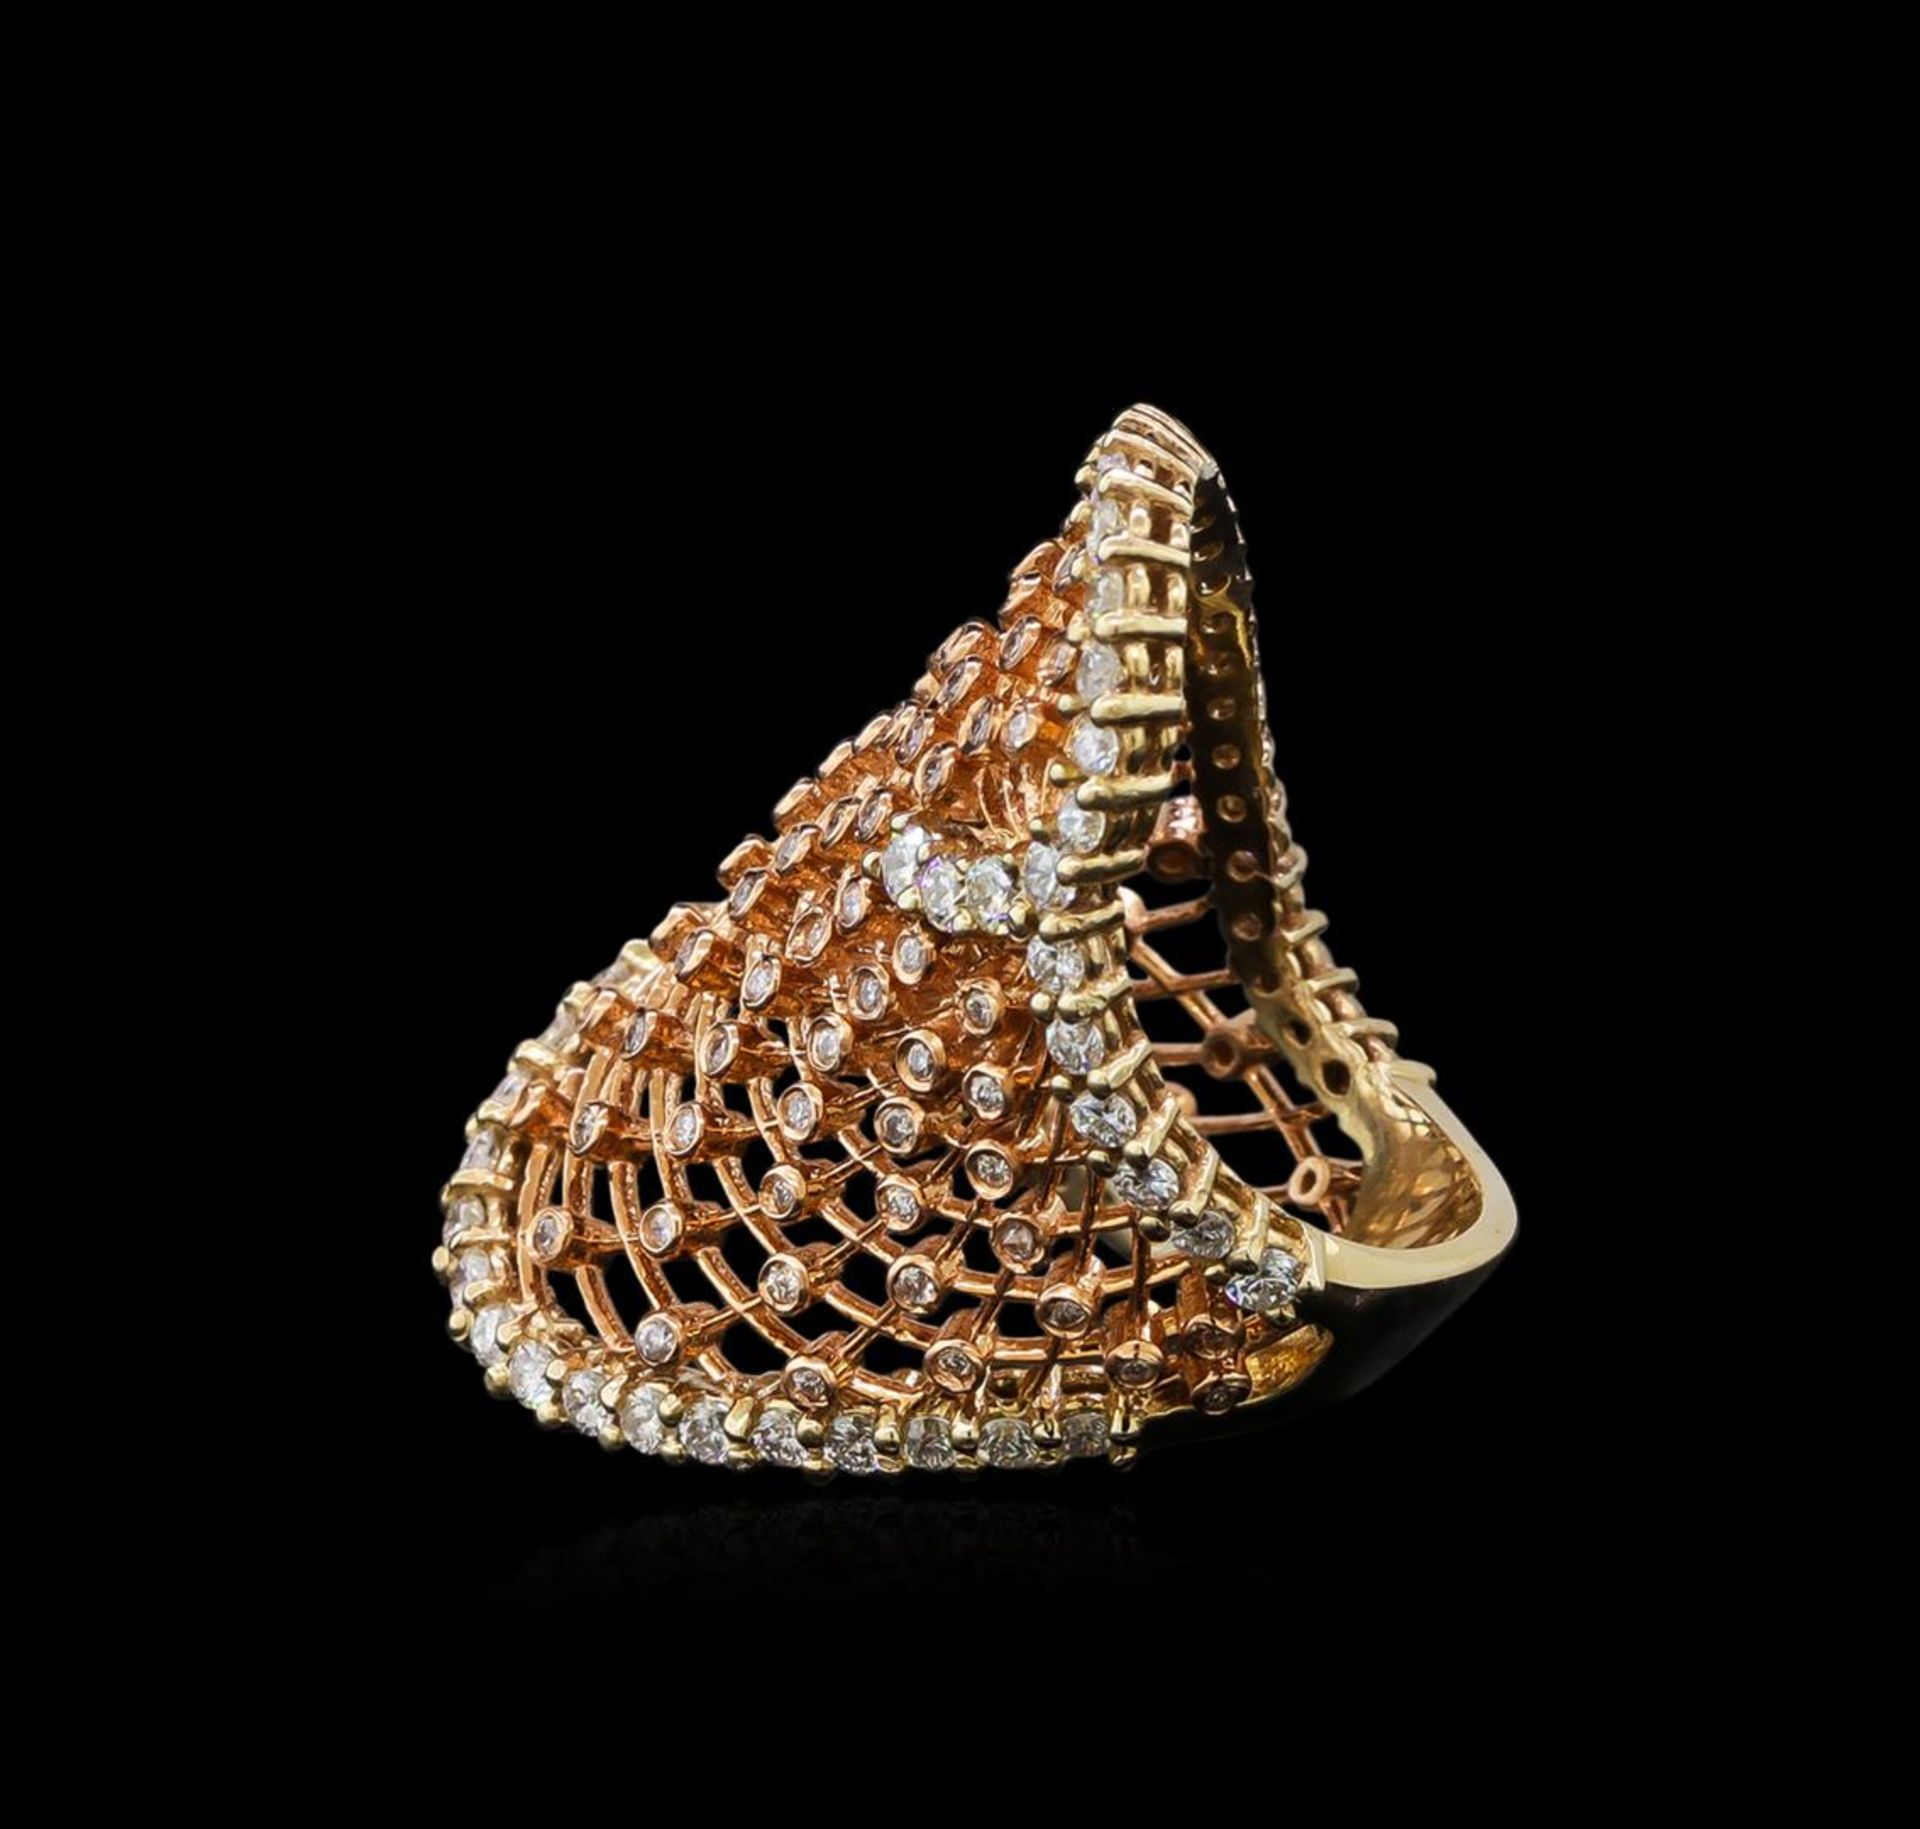 14KT Two-Tone Gold 1.63 ctw Diamond Ring - Image 3 of 5